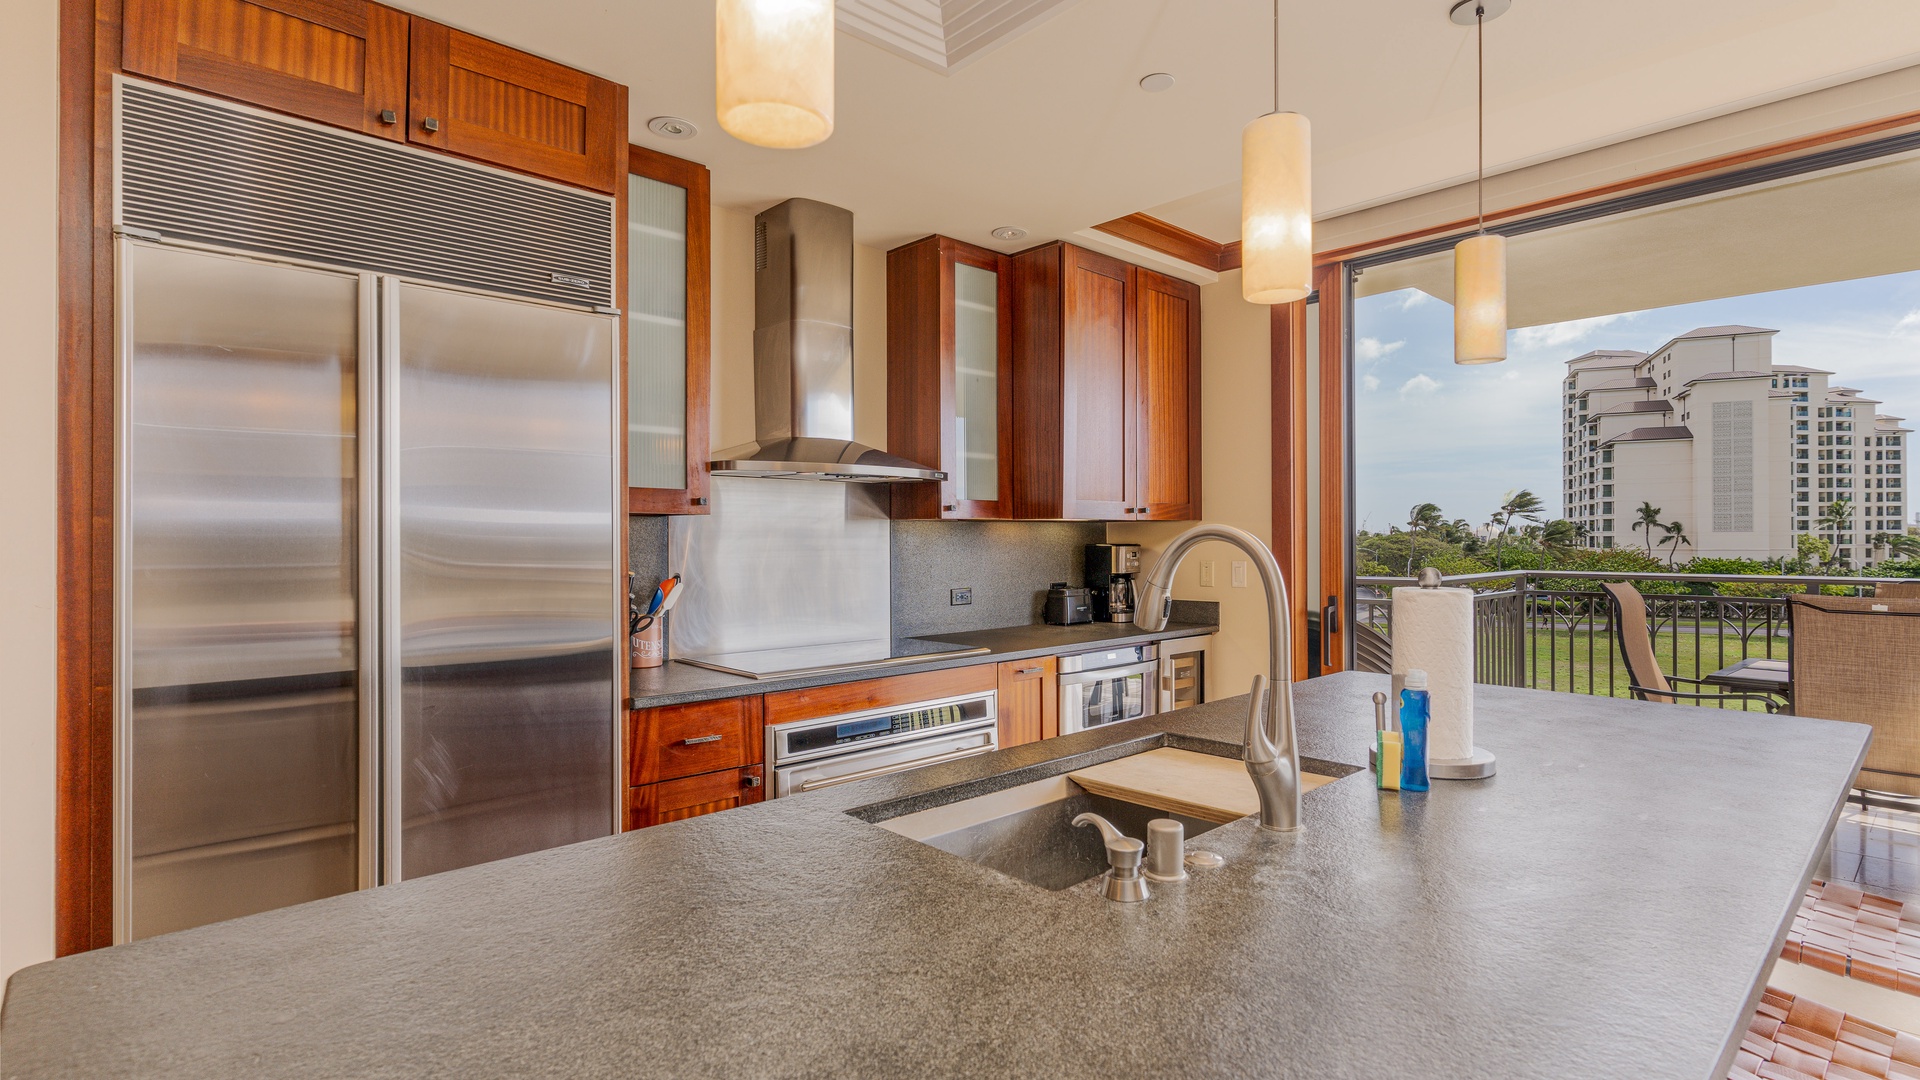 Kapolei Vacation Rentals, Ko Olina Beach Villas O425 - There is a fully equipped kitchen with stainless steel appliances.